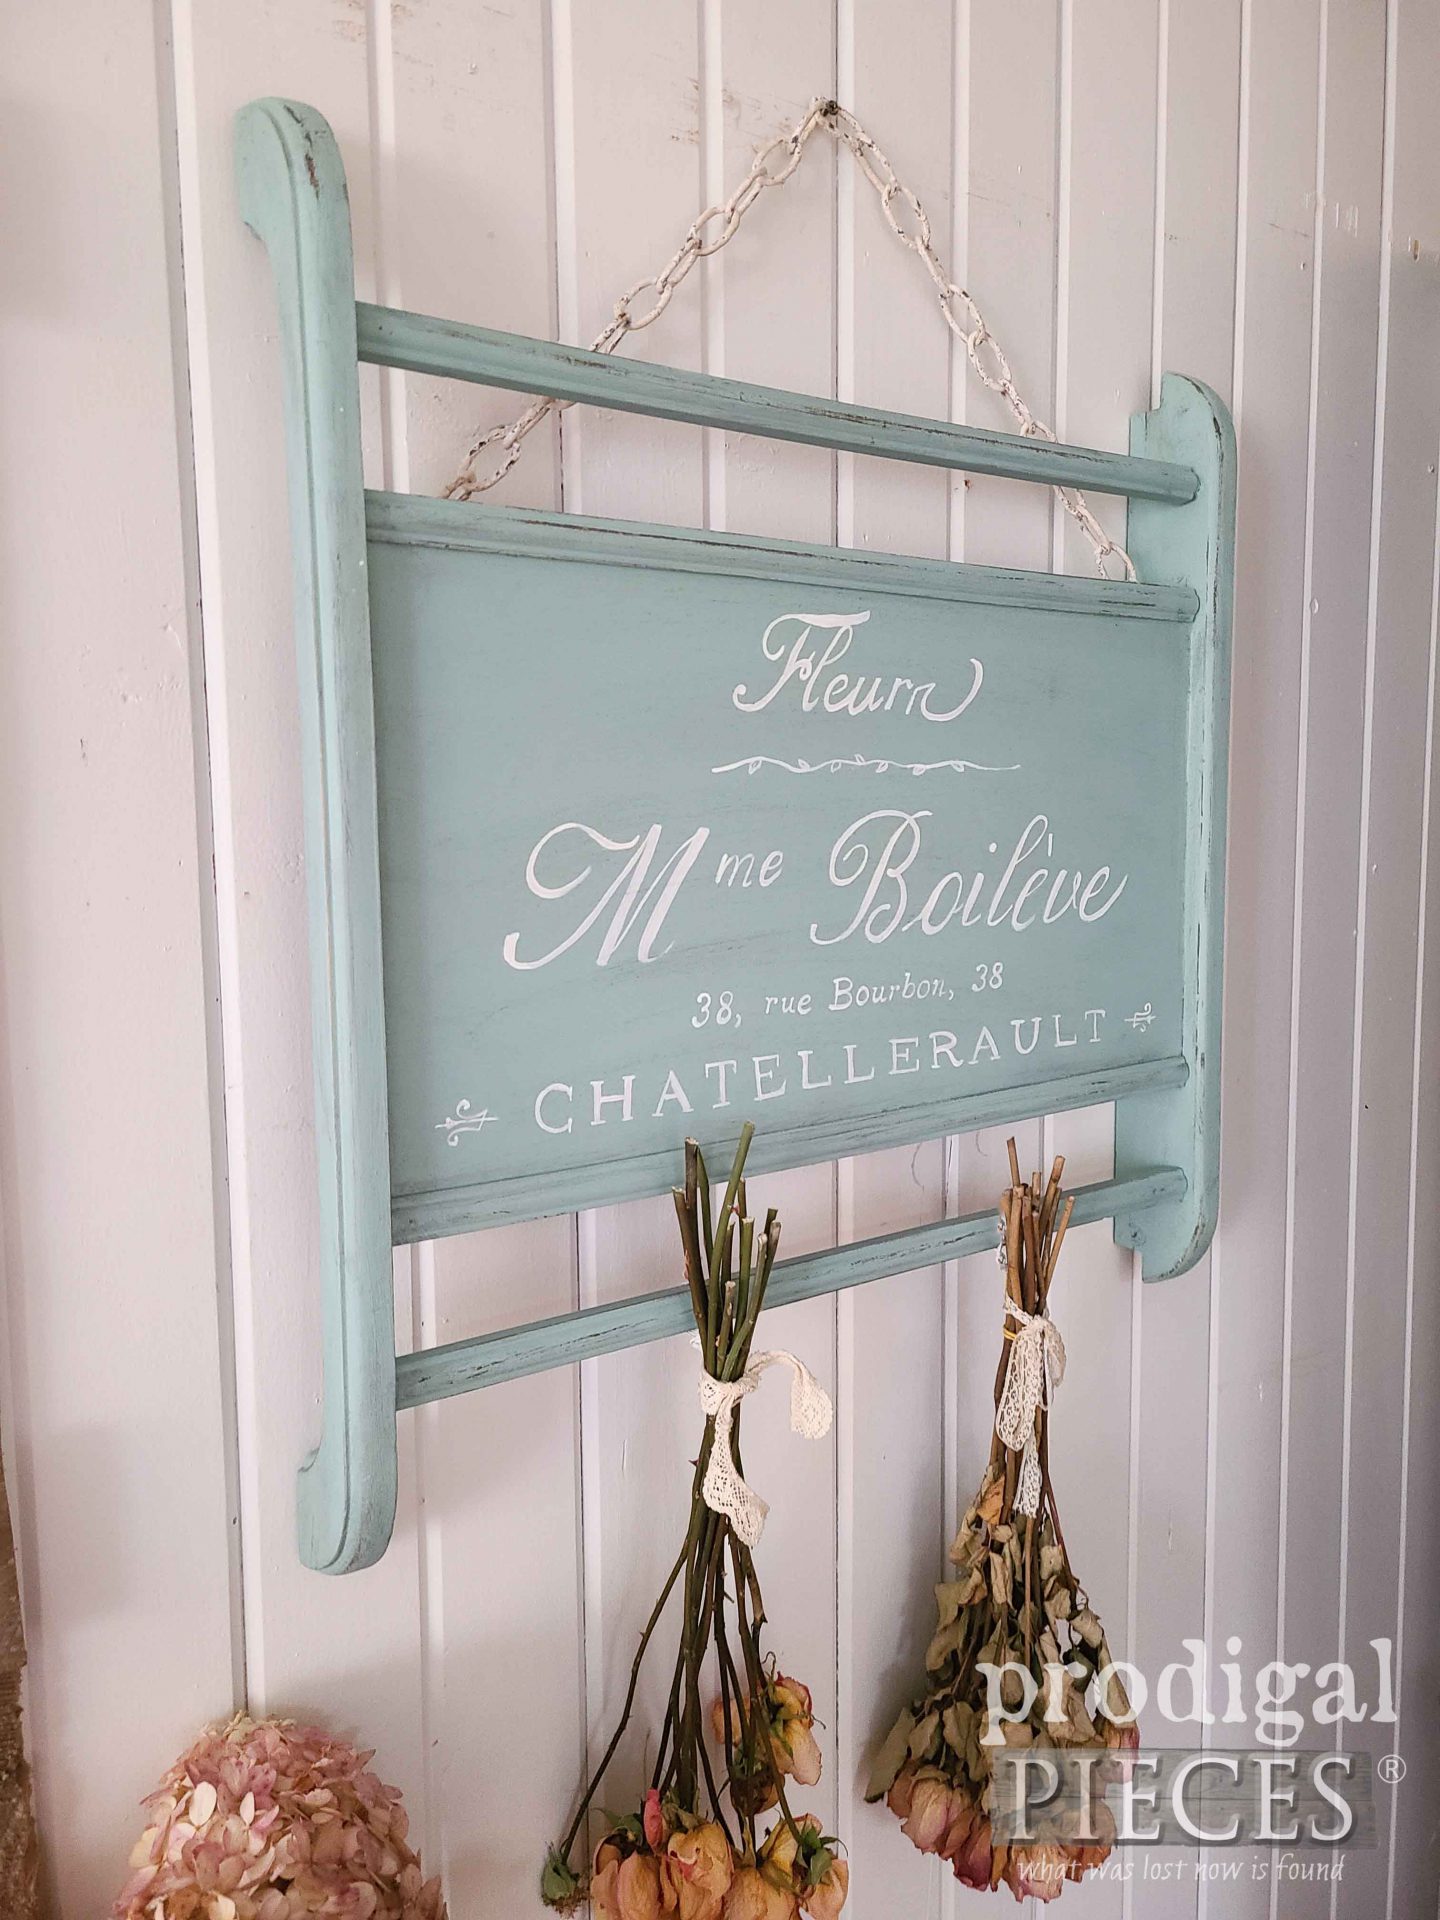 French Blue Fleur Sign by Larissa of Prodigal Pieces | prodigalpieces.com #prodigalpieces #french #farmhouse